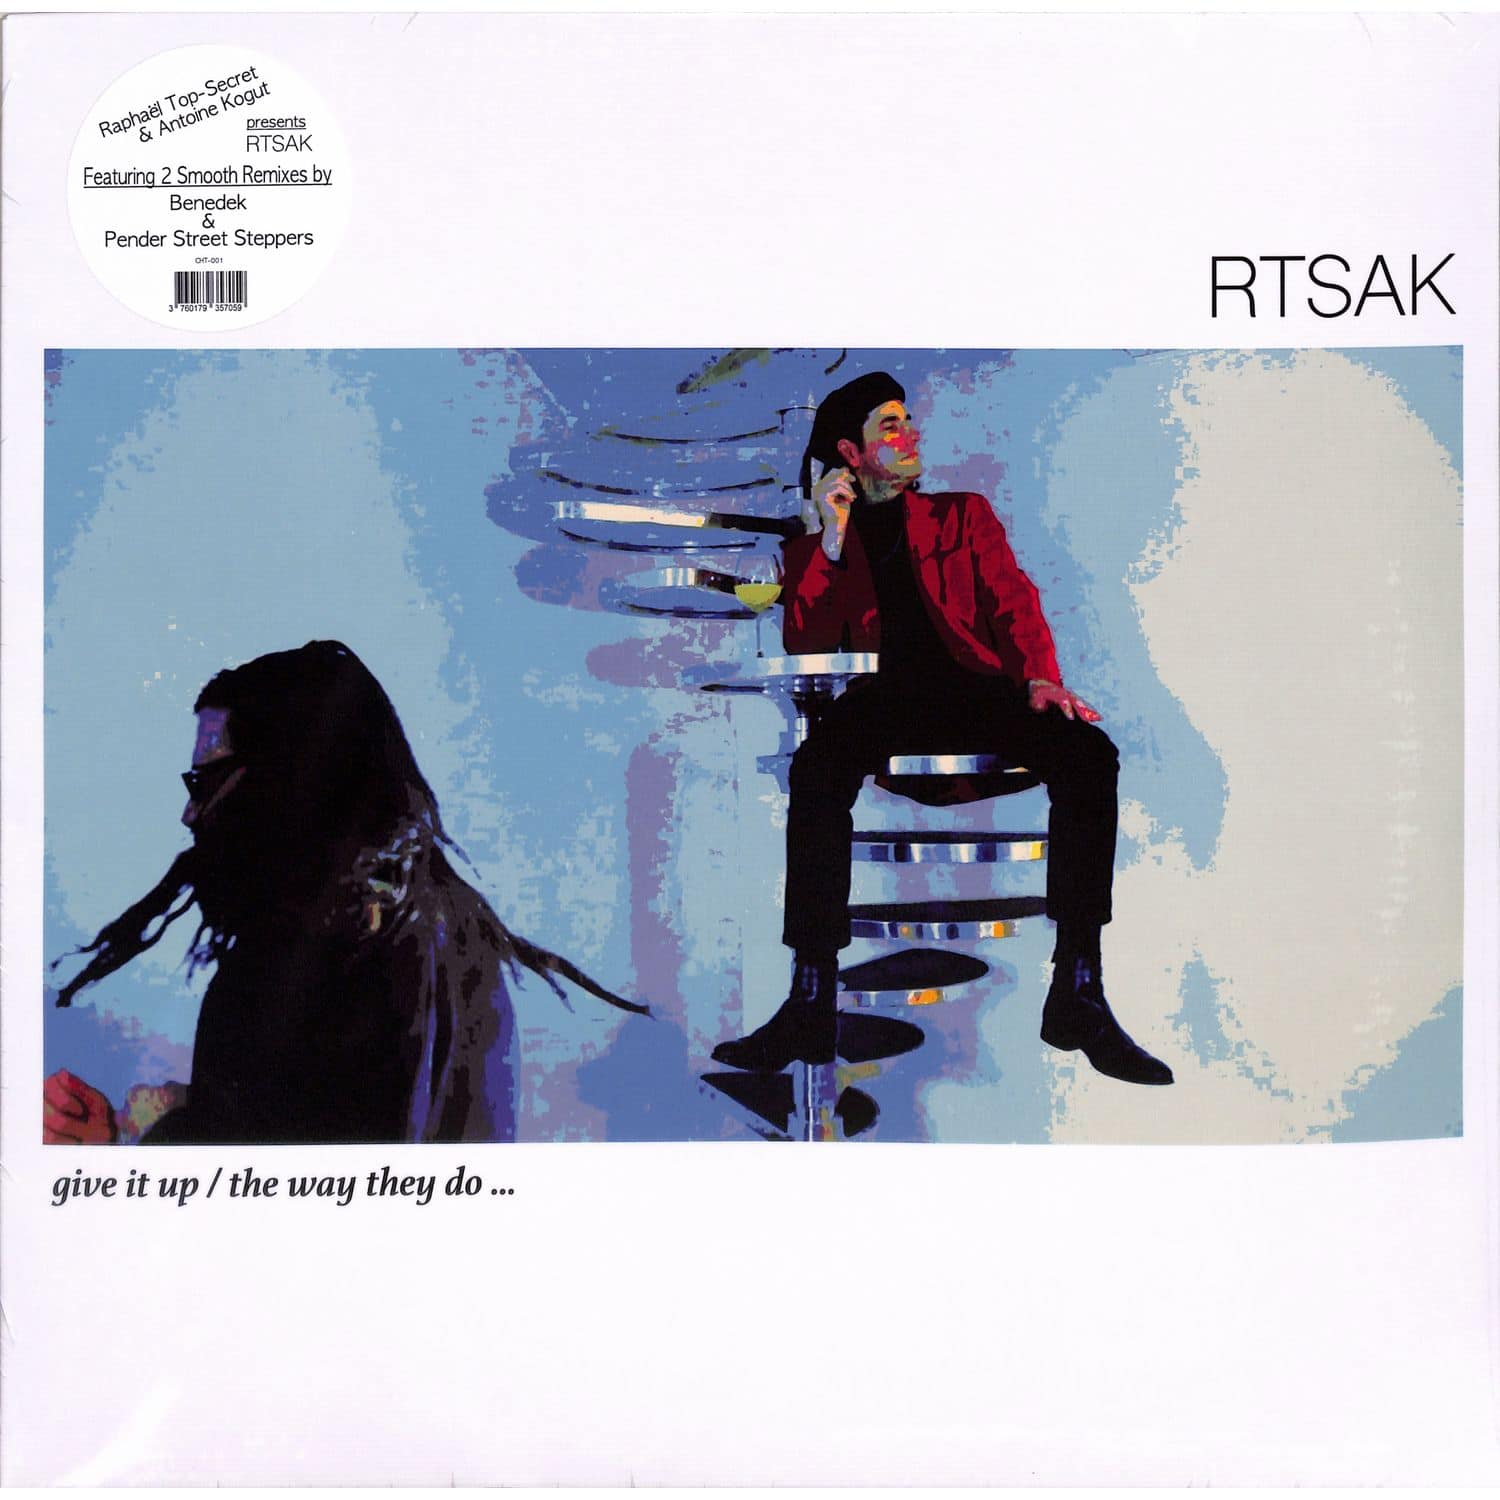 RTSAK - GIVE IT UP / THE WAY THEY DO...